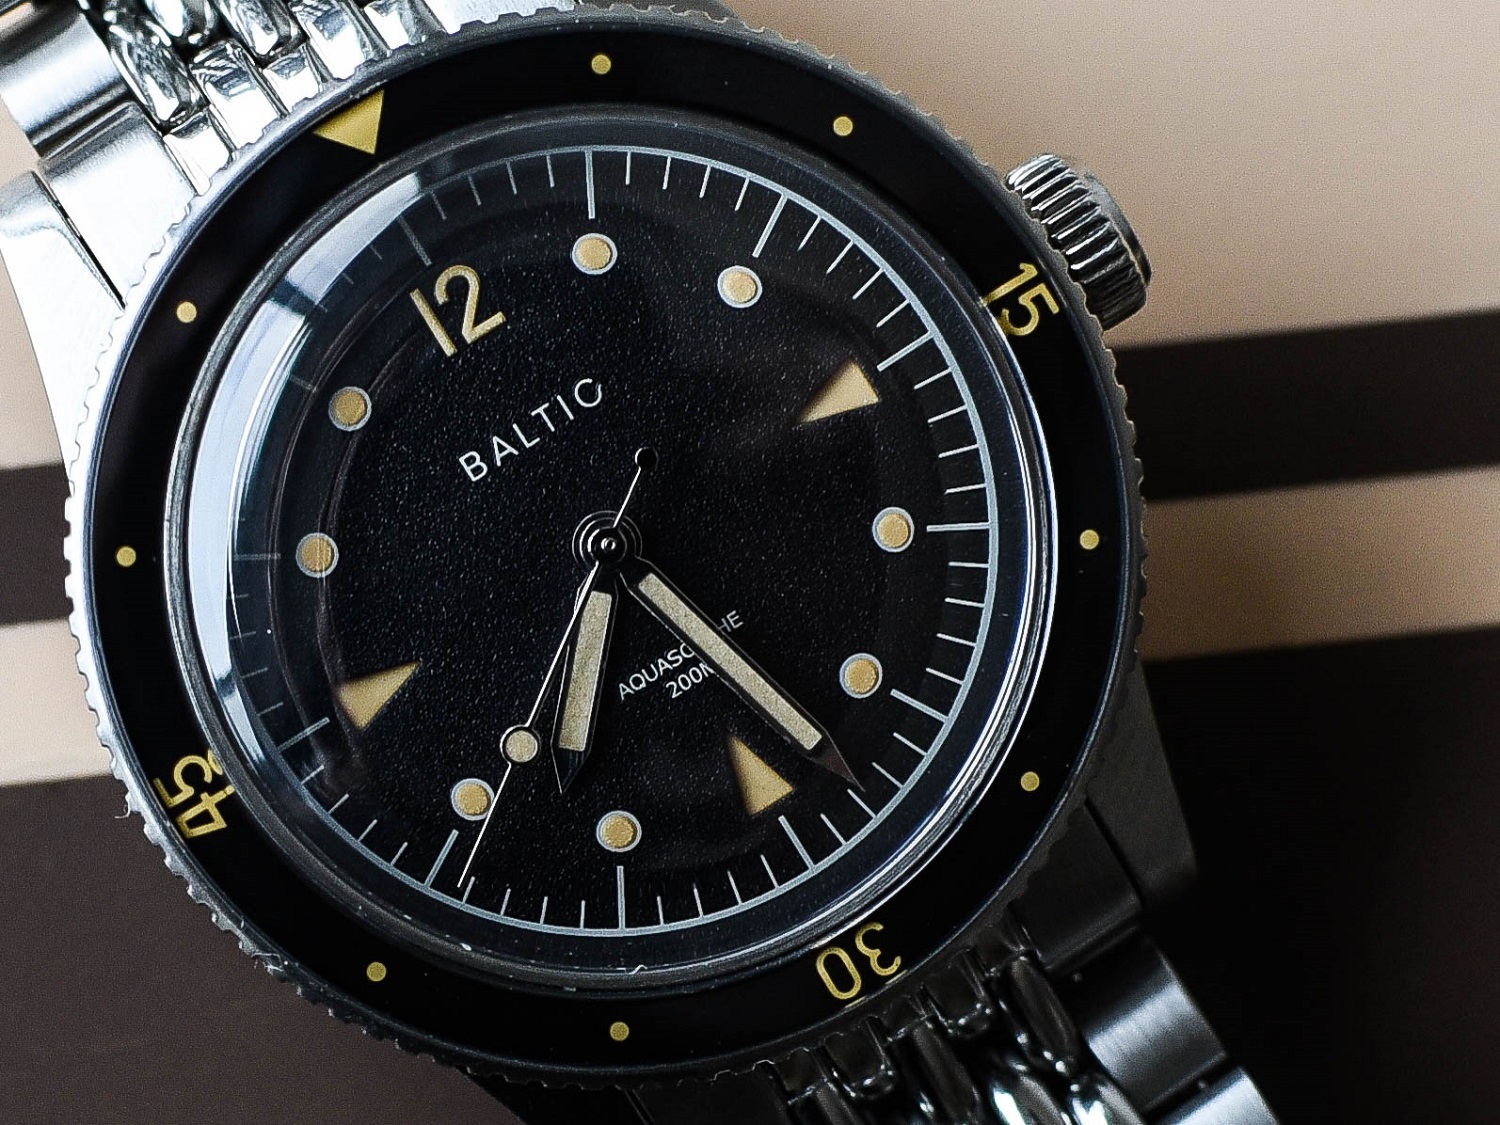 Baltic Aquascaphe dial detail and close up